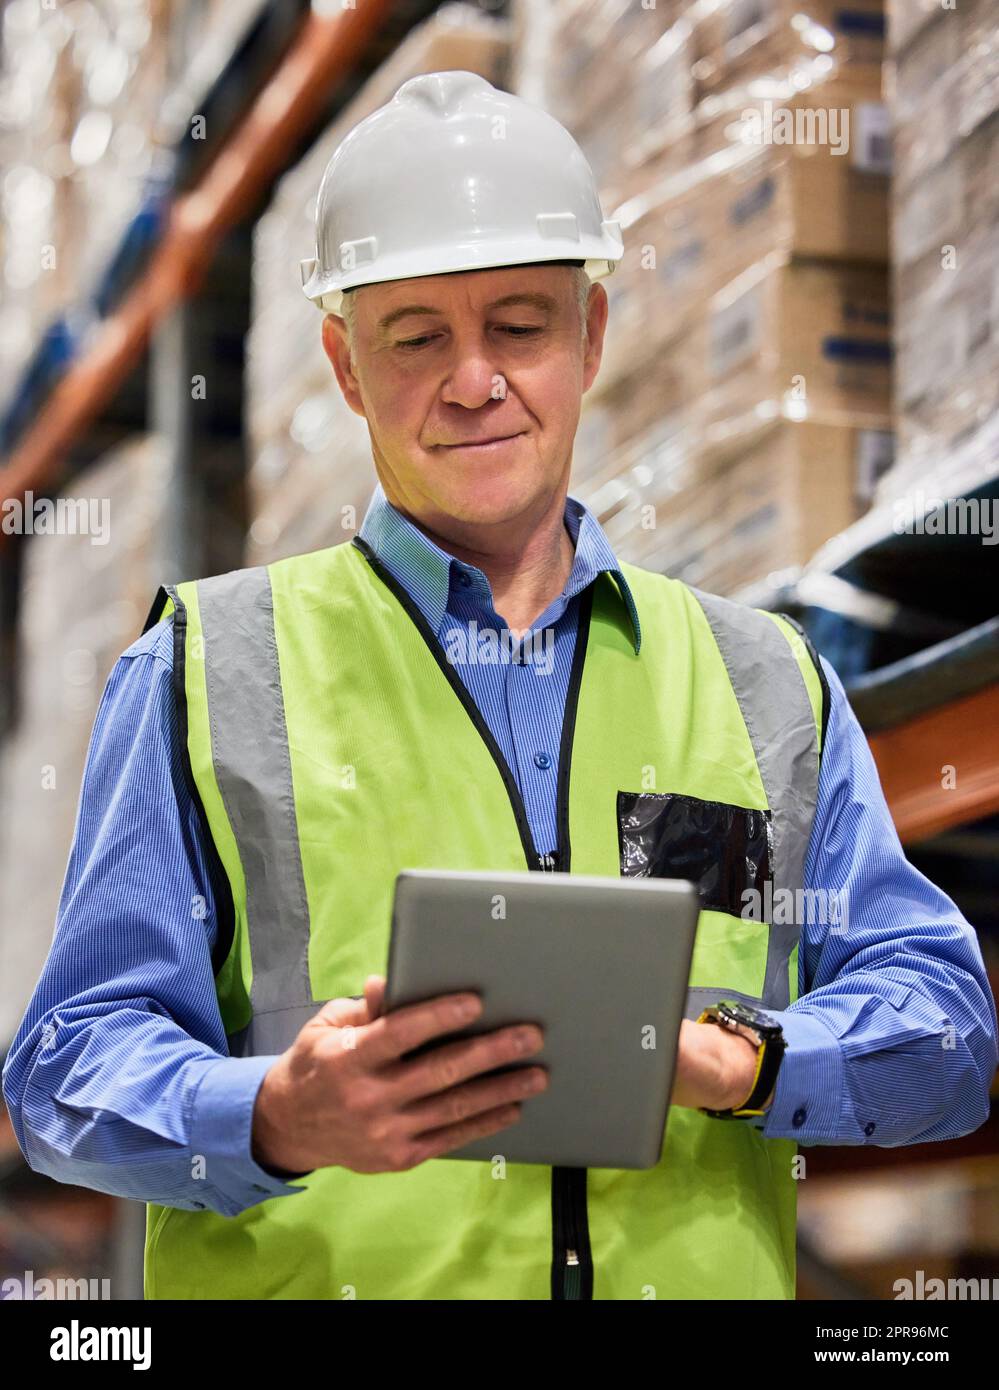 You cant succeed without some hard work. a mature man using a digital tablet while working in a warehouse. Stock Photo